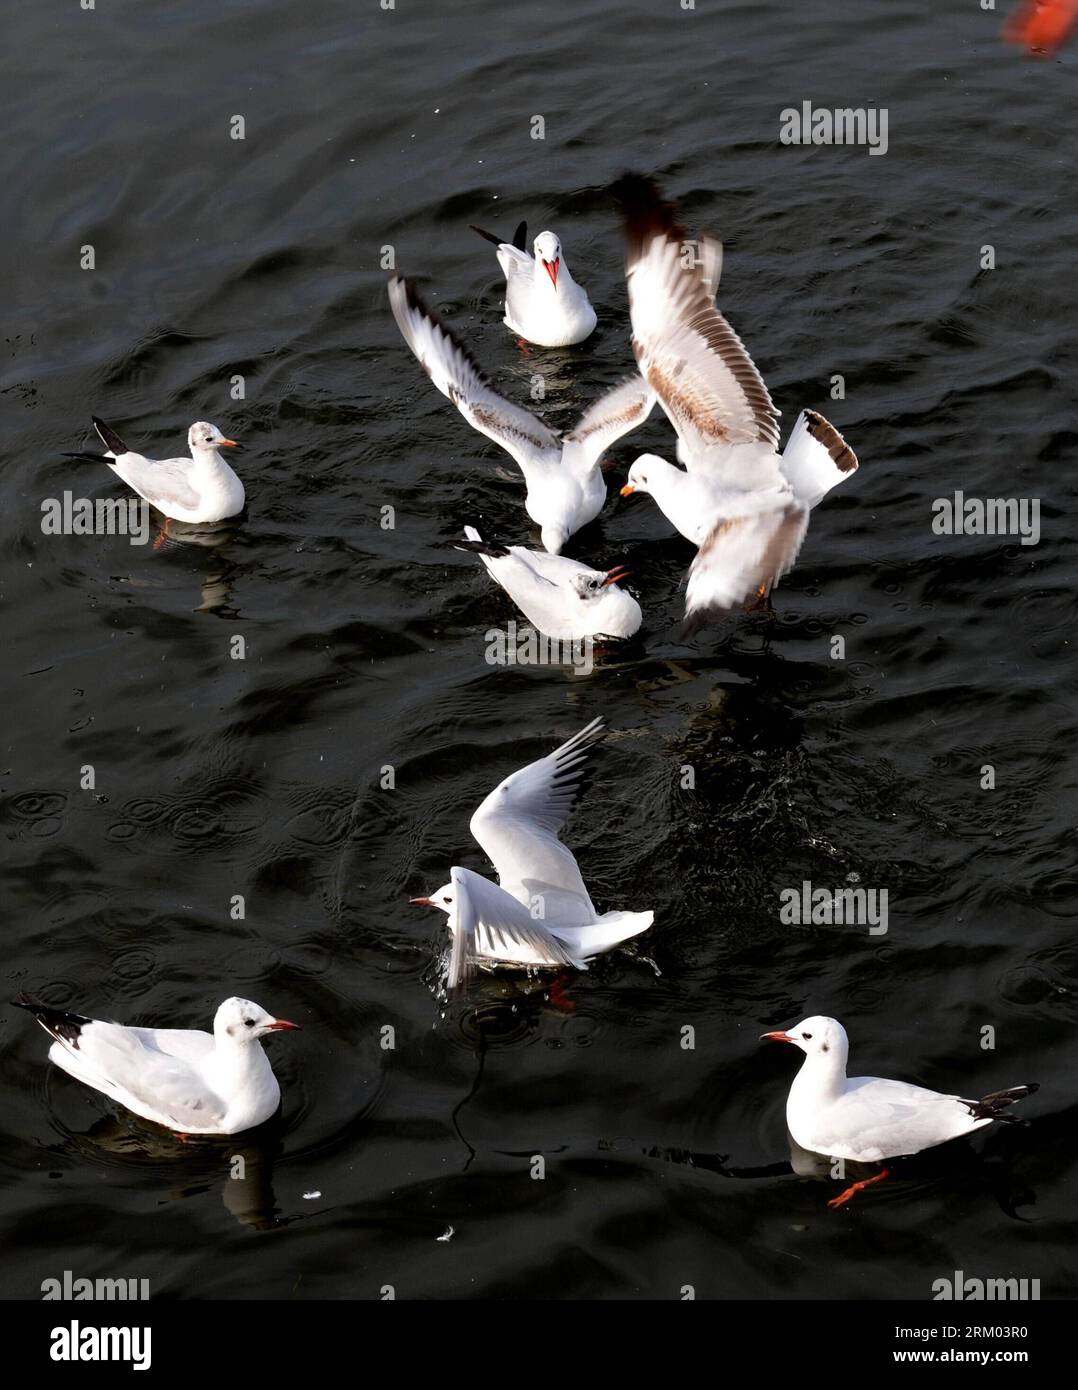 Bildnummer: 59316312  Datum: 07.03.2013  Copyright: imago/Xinhua (130307) -- QINHUANGDAO, March 7, 2013 (Xinhua) -- Seagulls compete for food over Xinkai River in Qinhuangdao, north China s Hebei Province, March 7, 2013. As the weather turned warmer, many migratory birds came here to find food. (Xinhua/Yang Shiyao) (mp) CHINA-HEBEI-QINHUANGDAO-SEAGULLS (CN) PUBLICATIONxNOTxINxCHN Gesellschaft Meer Tier Möwe Seemöwe x0x xdd 2013 hoch      59316312 Date 07 03 2013 Copyright Imago XINHUA  Qinhuangdao March 7 2013 XINHUA seagulls compete for Food Over  River in Qinhuangdao North China S Hebei Prov Stock Photo